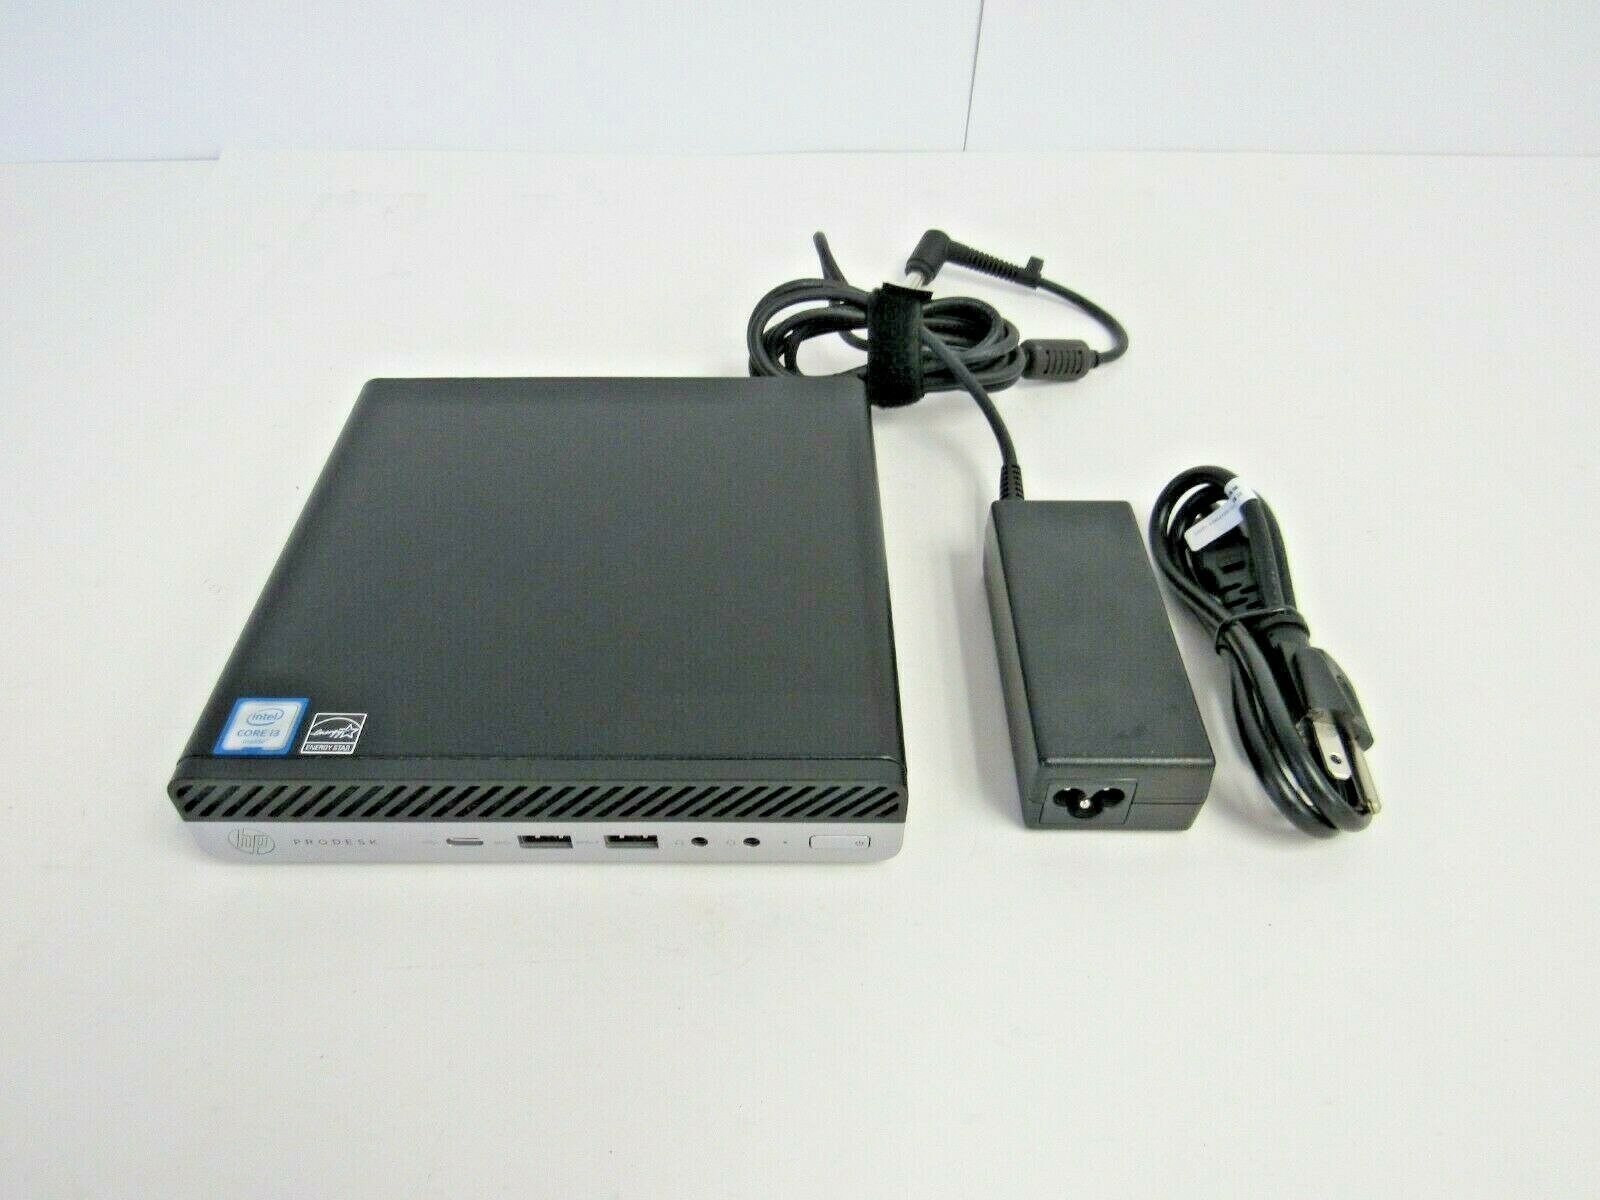 Primary image for HP ProDesk 800 G3 Mini i3-6100T 8GB DDR4 500GB 6Gbps HDD Win 10 Pro w/ AC   66-4